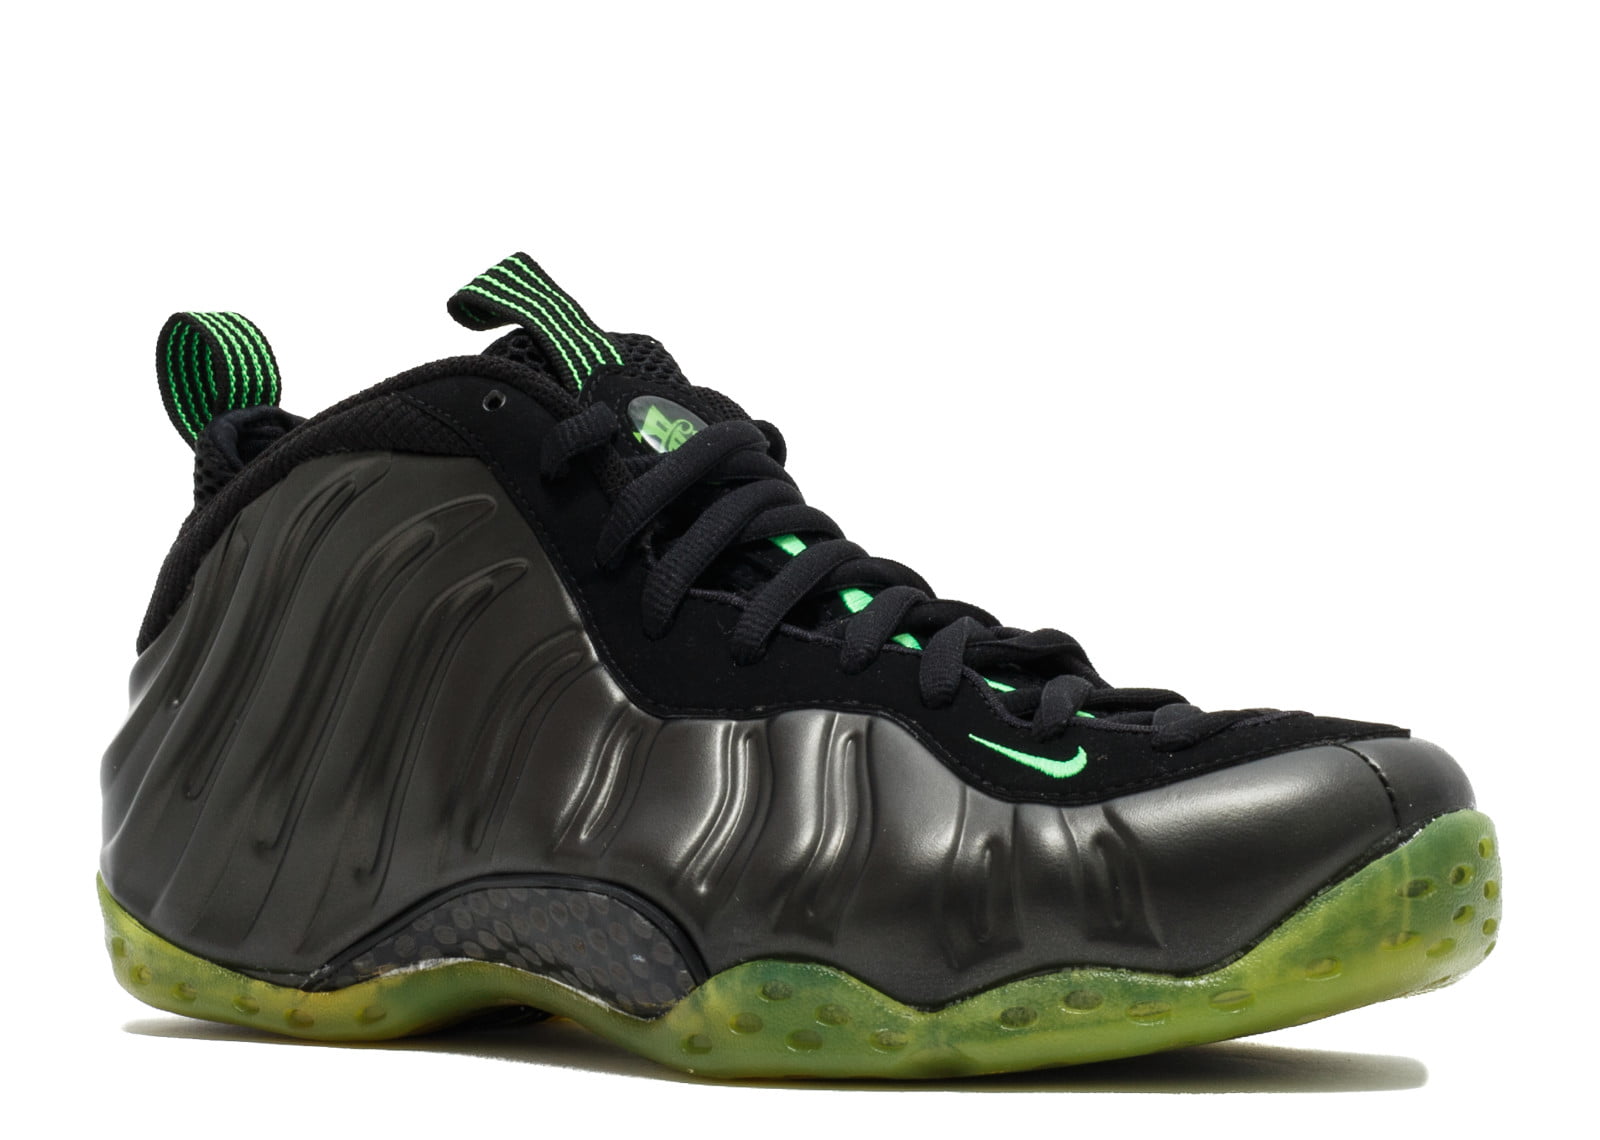 Nike - Air Foamposite One 'Hoh Electric Green' - 314996-030 - Size 12 ...